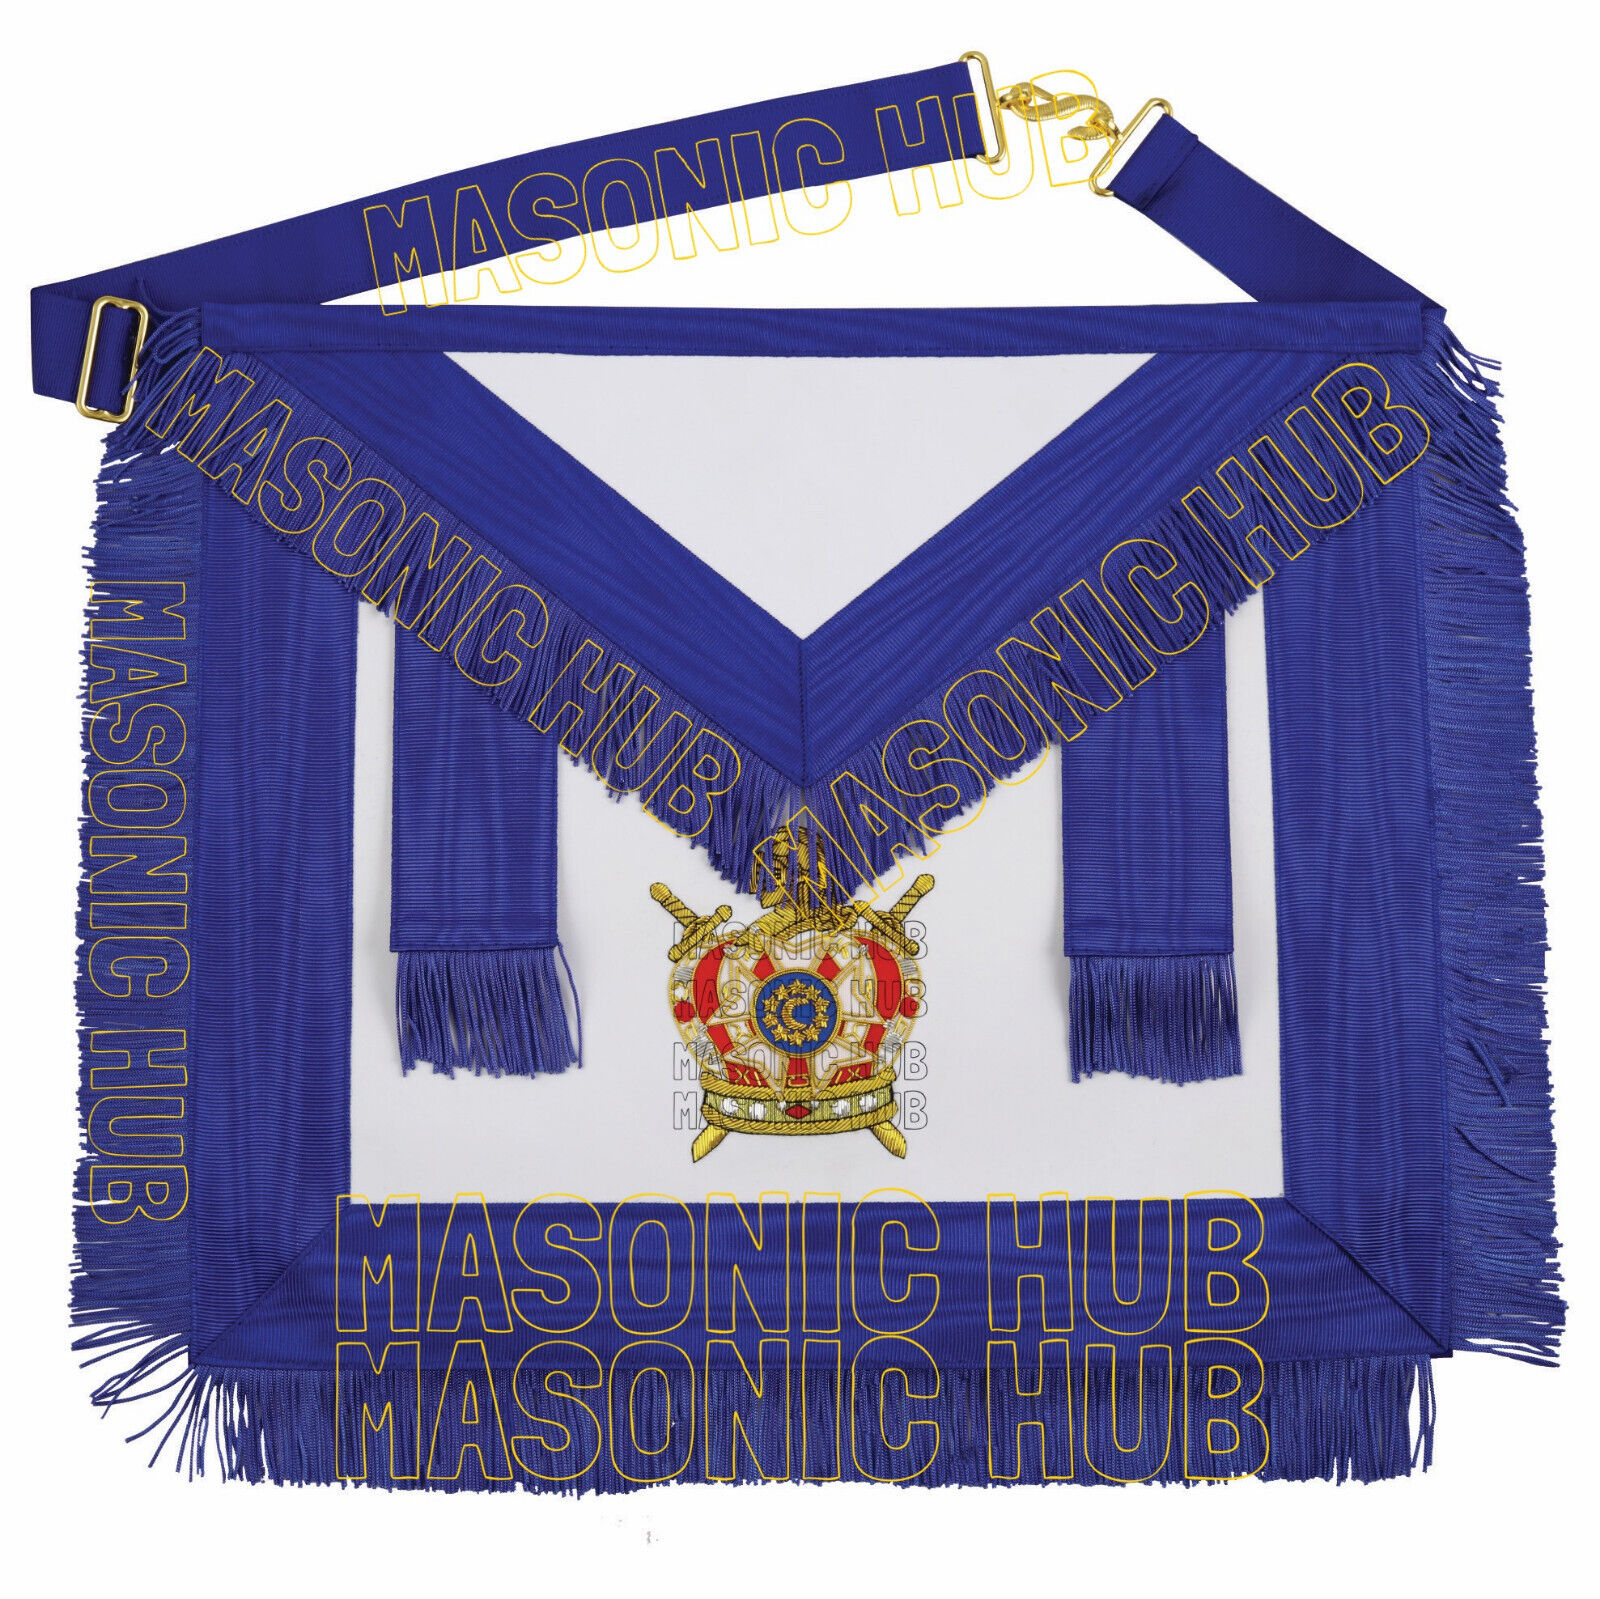 Masonic Illinois DeMolay Apron: Handcrafted Excellence in 100% Lambskin